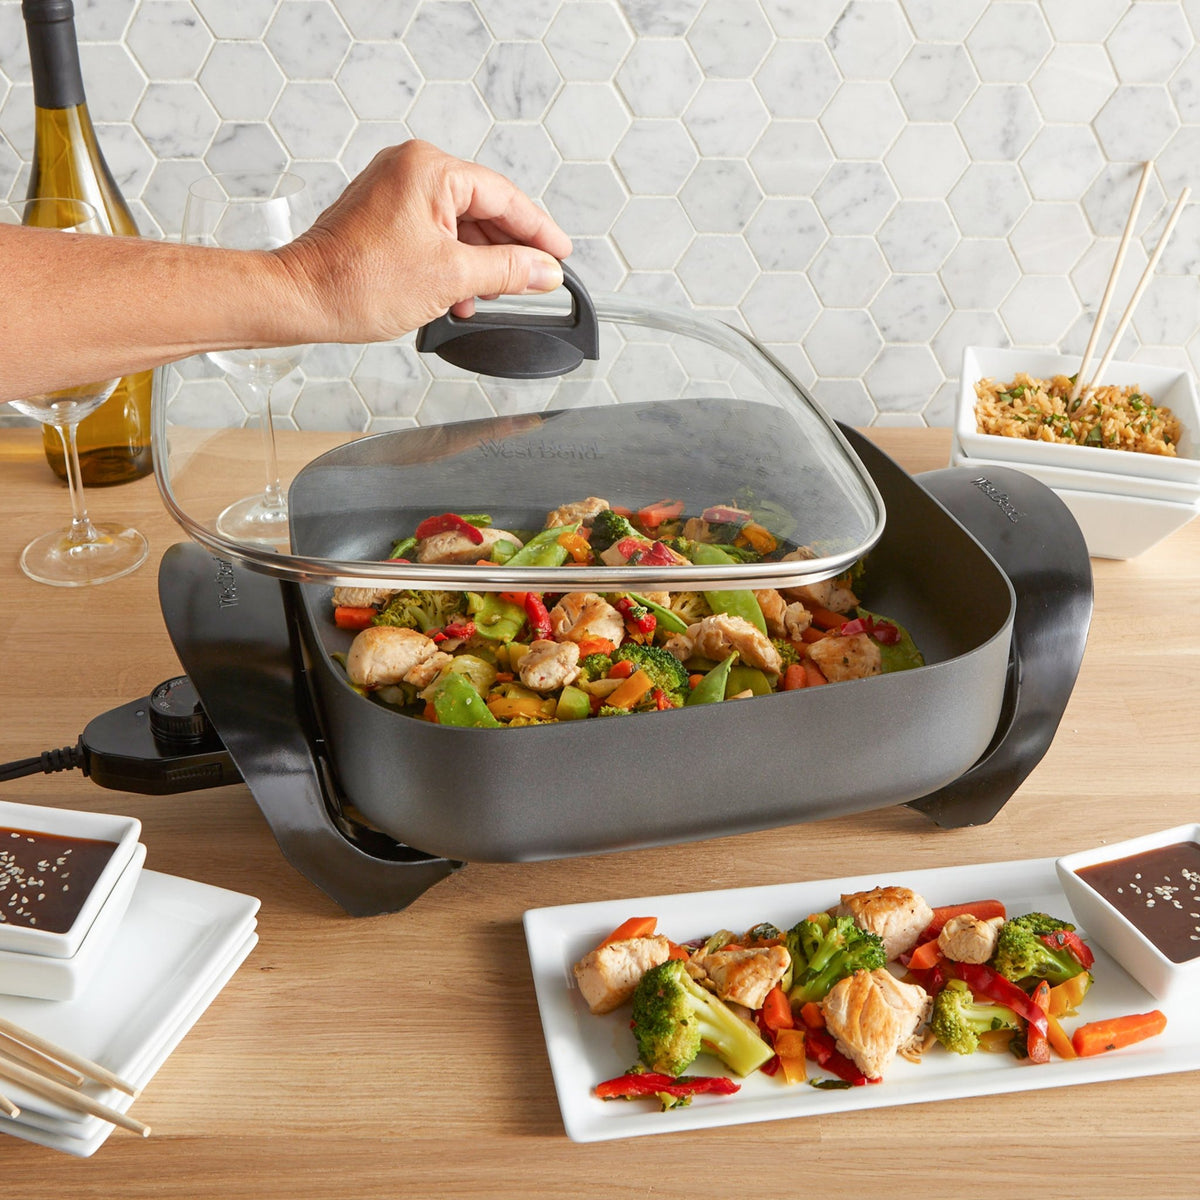 West Bend 12-Inch Family-Sized Electric Skillet with Diamond